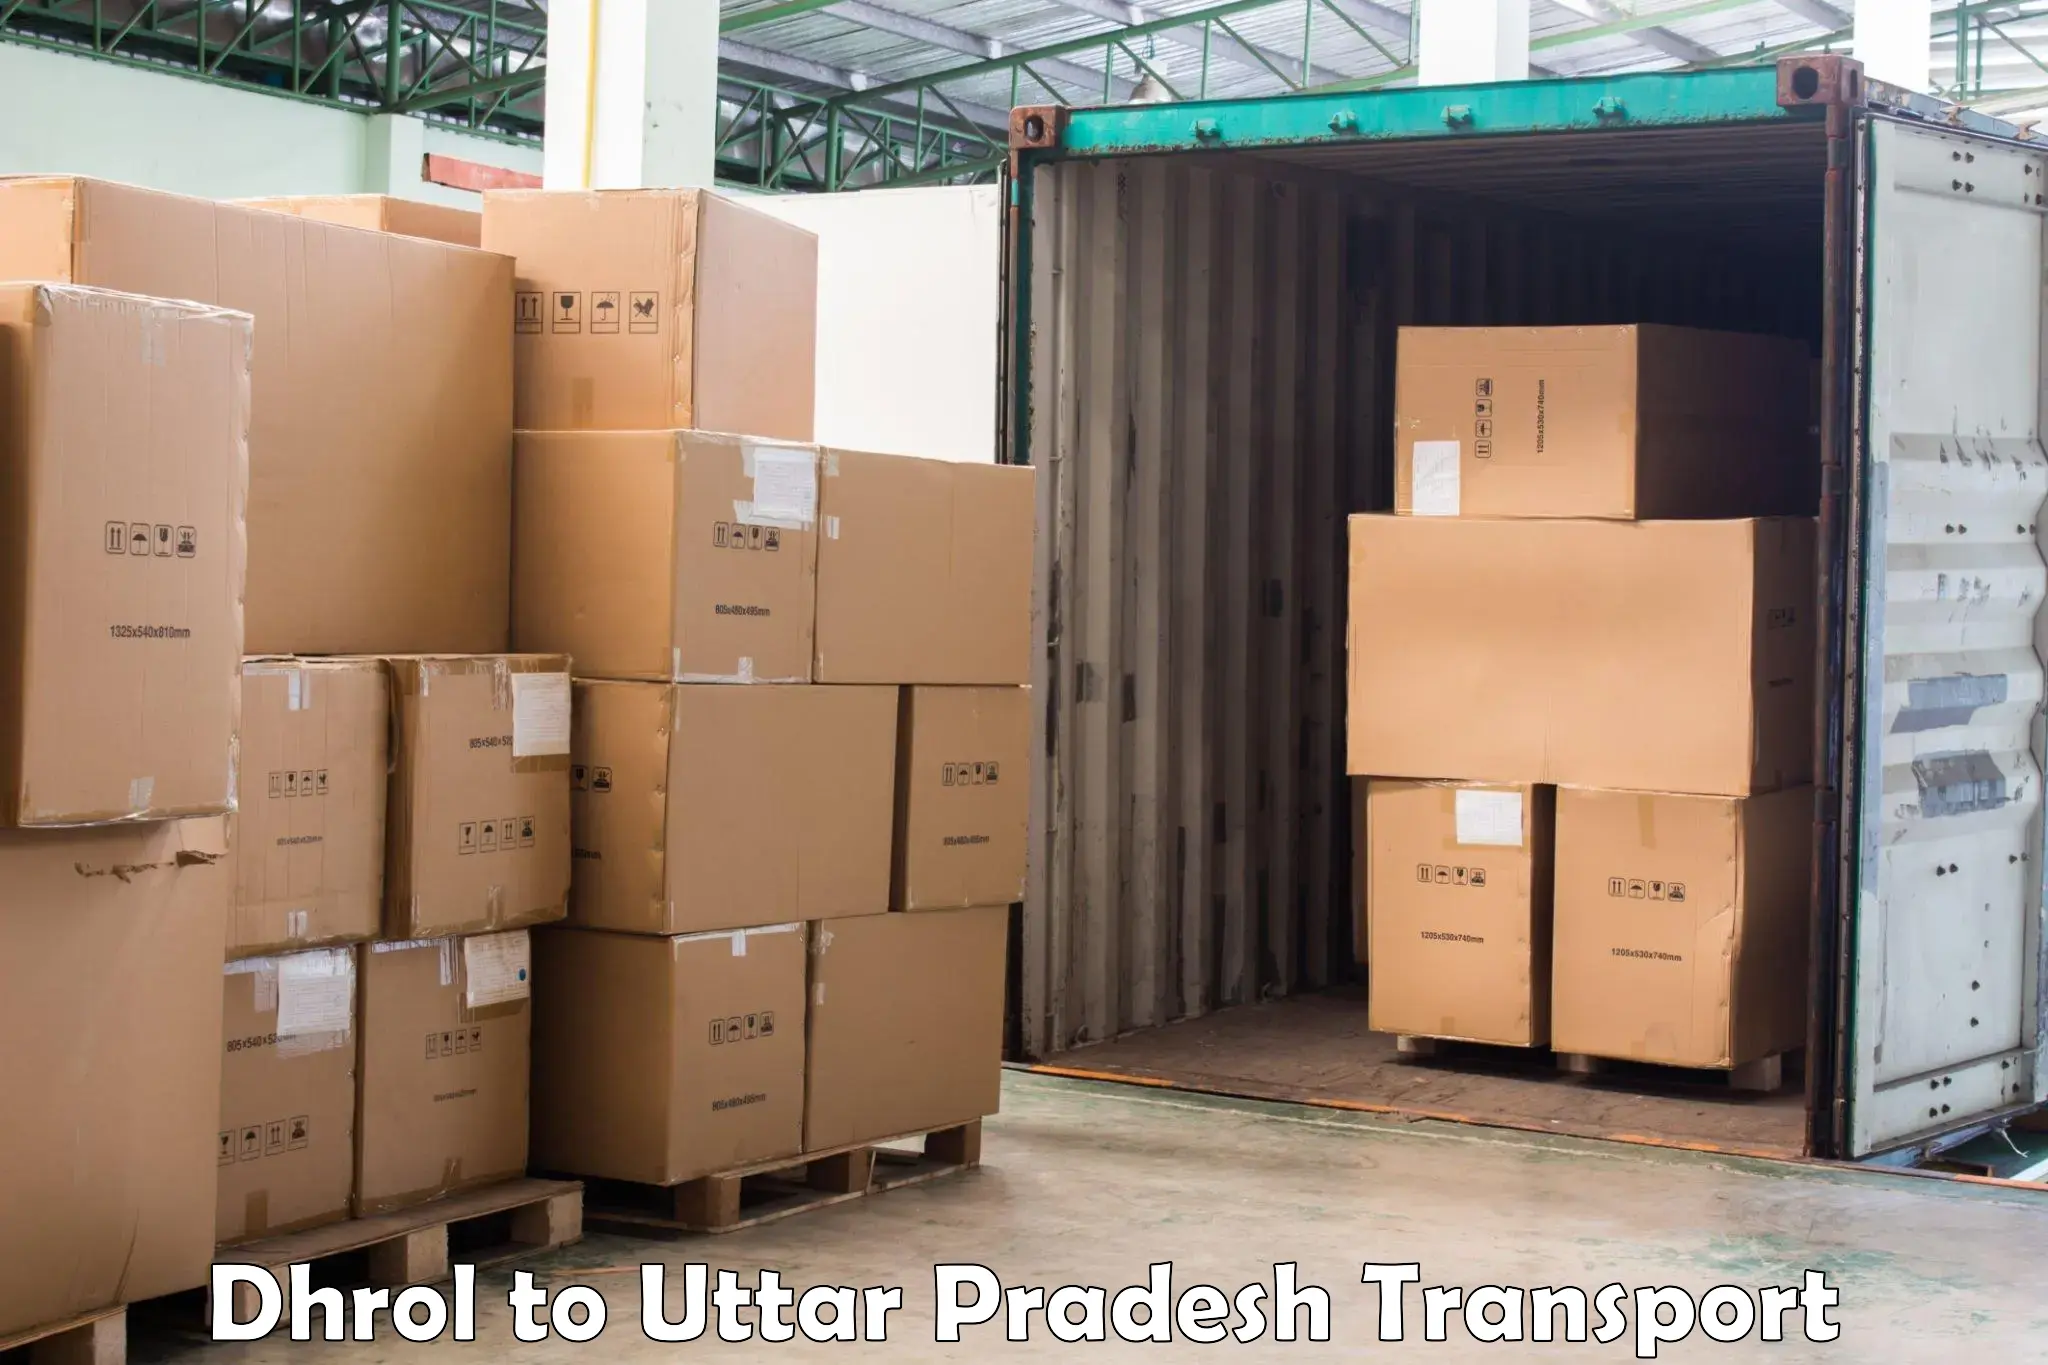 Domestic goods transportation services in Dhrol to Shahabad